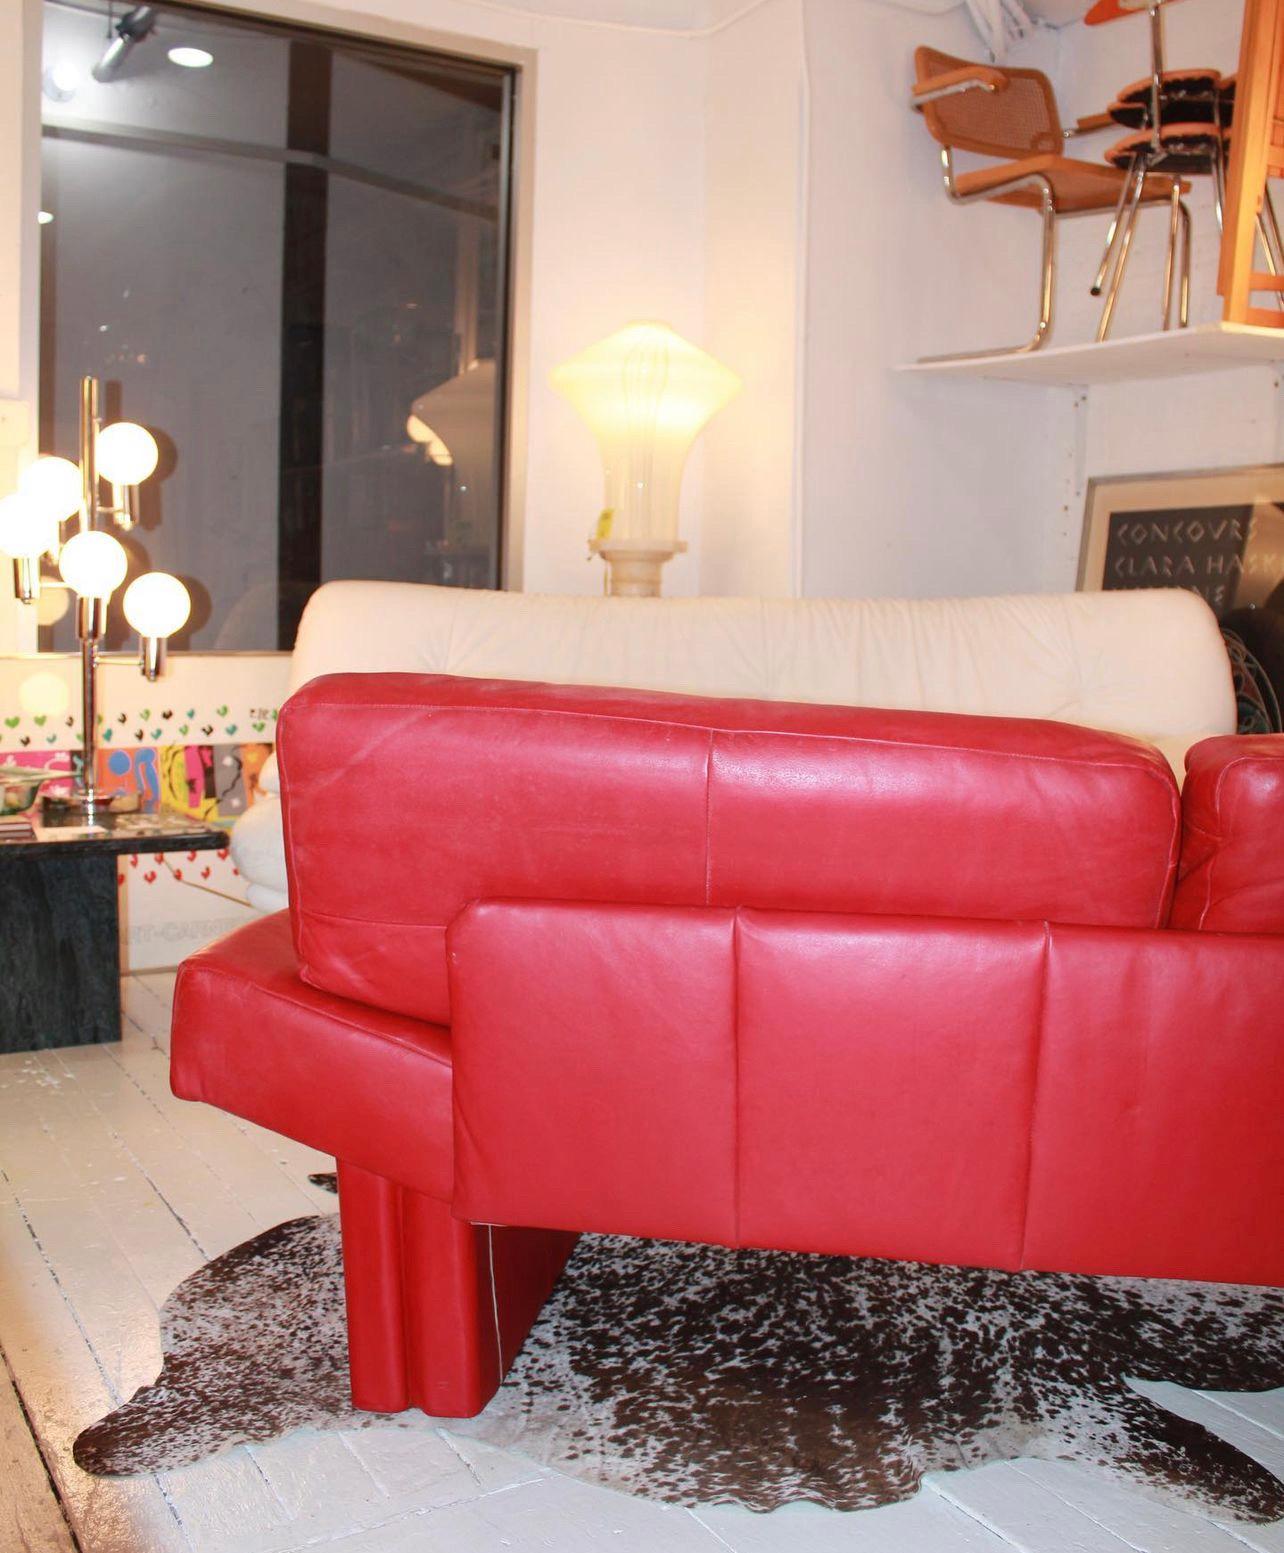 Late 20th Century Post Modern Red Leather Sofa by Flep S.P.a. Bitonto, Made in Italy For Sale